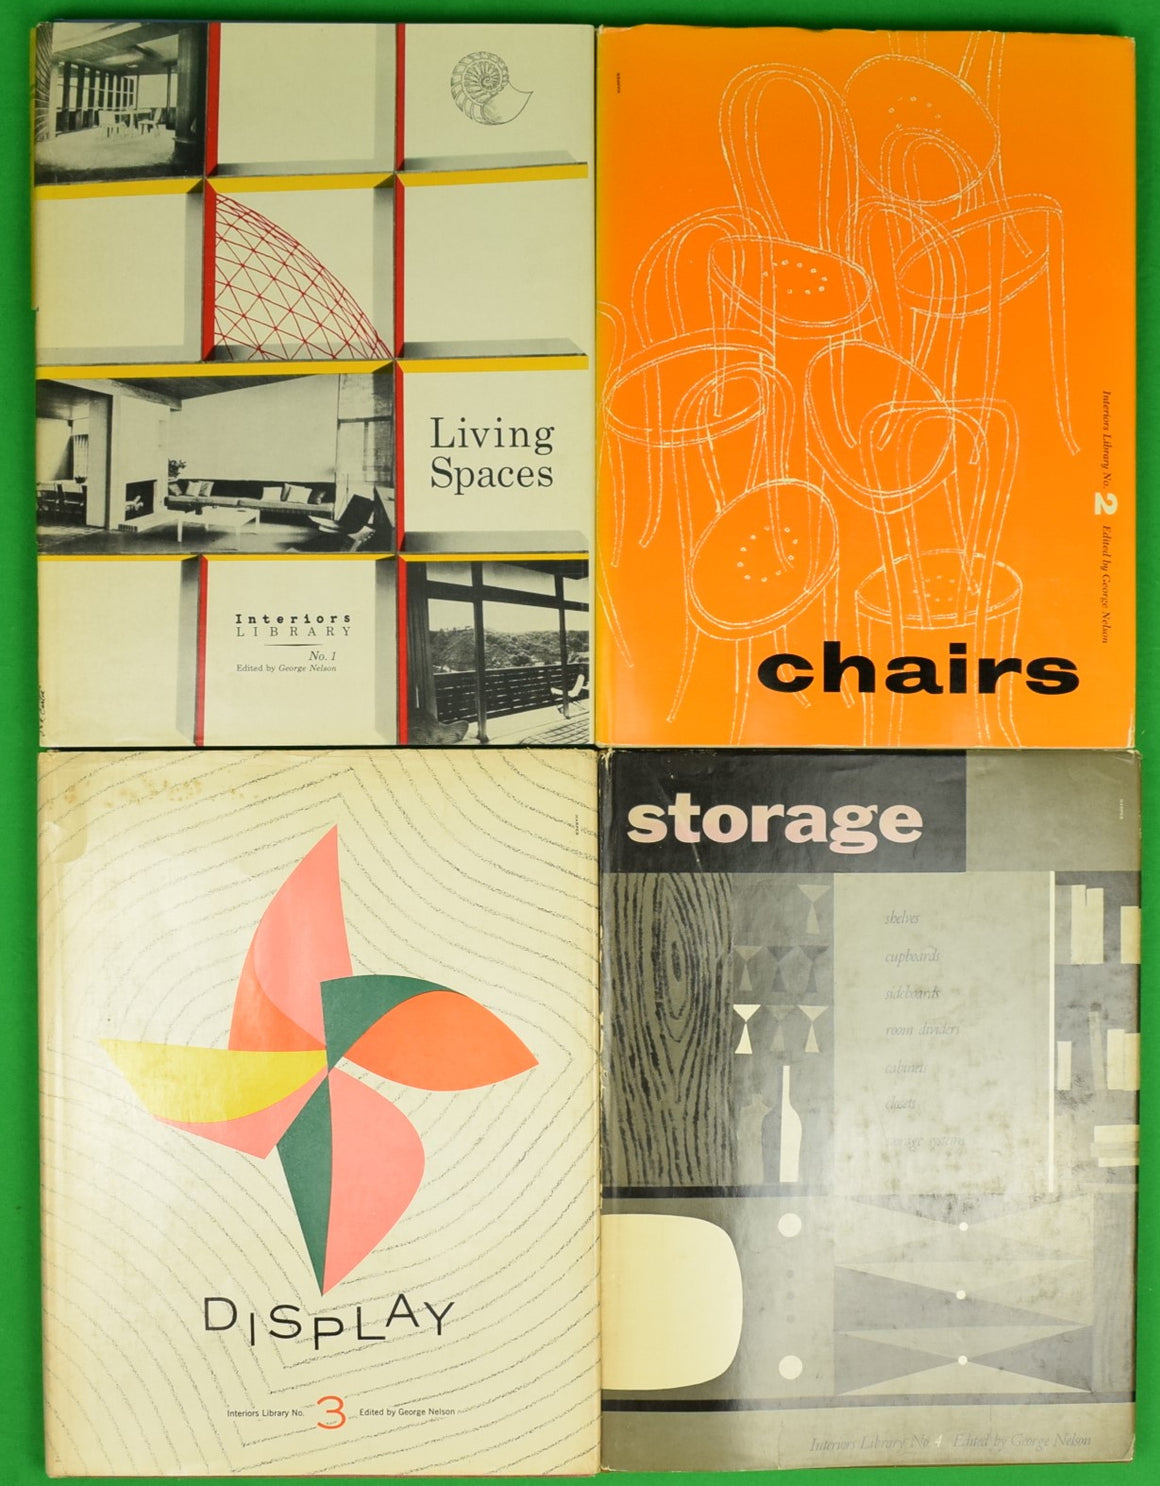 "Interiors Library No. 1-4" 1952 NELSON, George